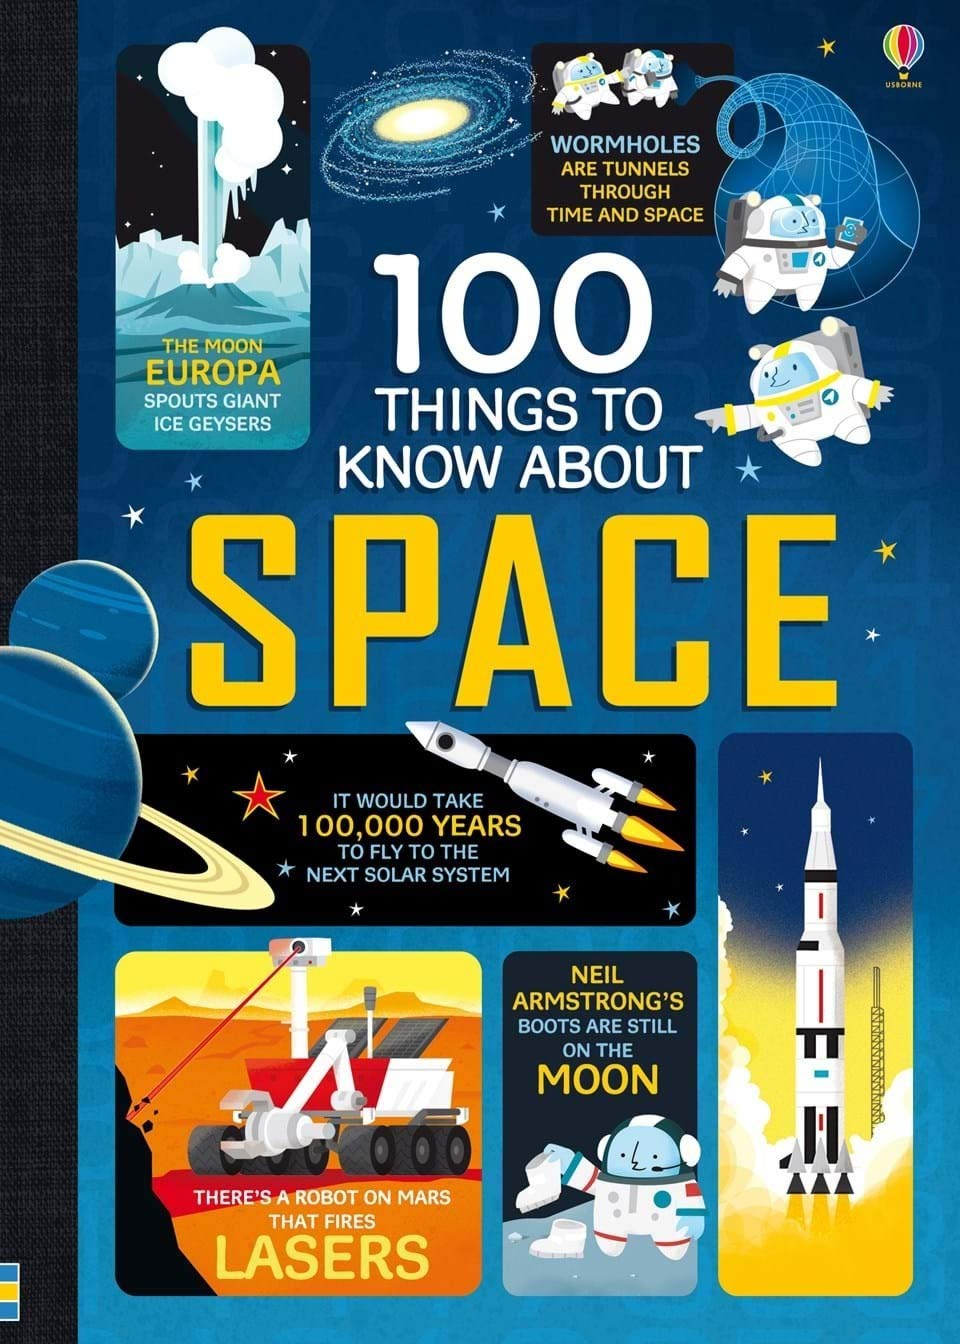 100 Things To Know About Space (Hardcover) esikidz marketplace children books preschool books  